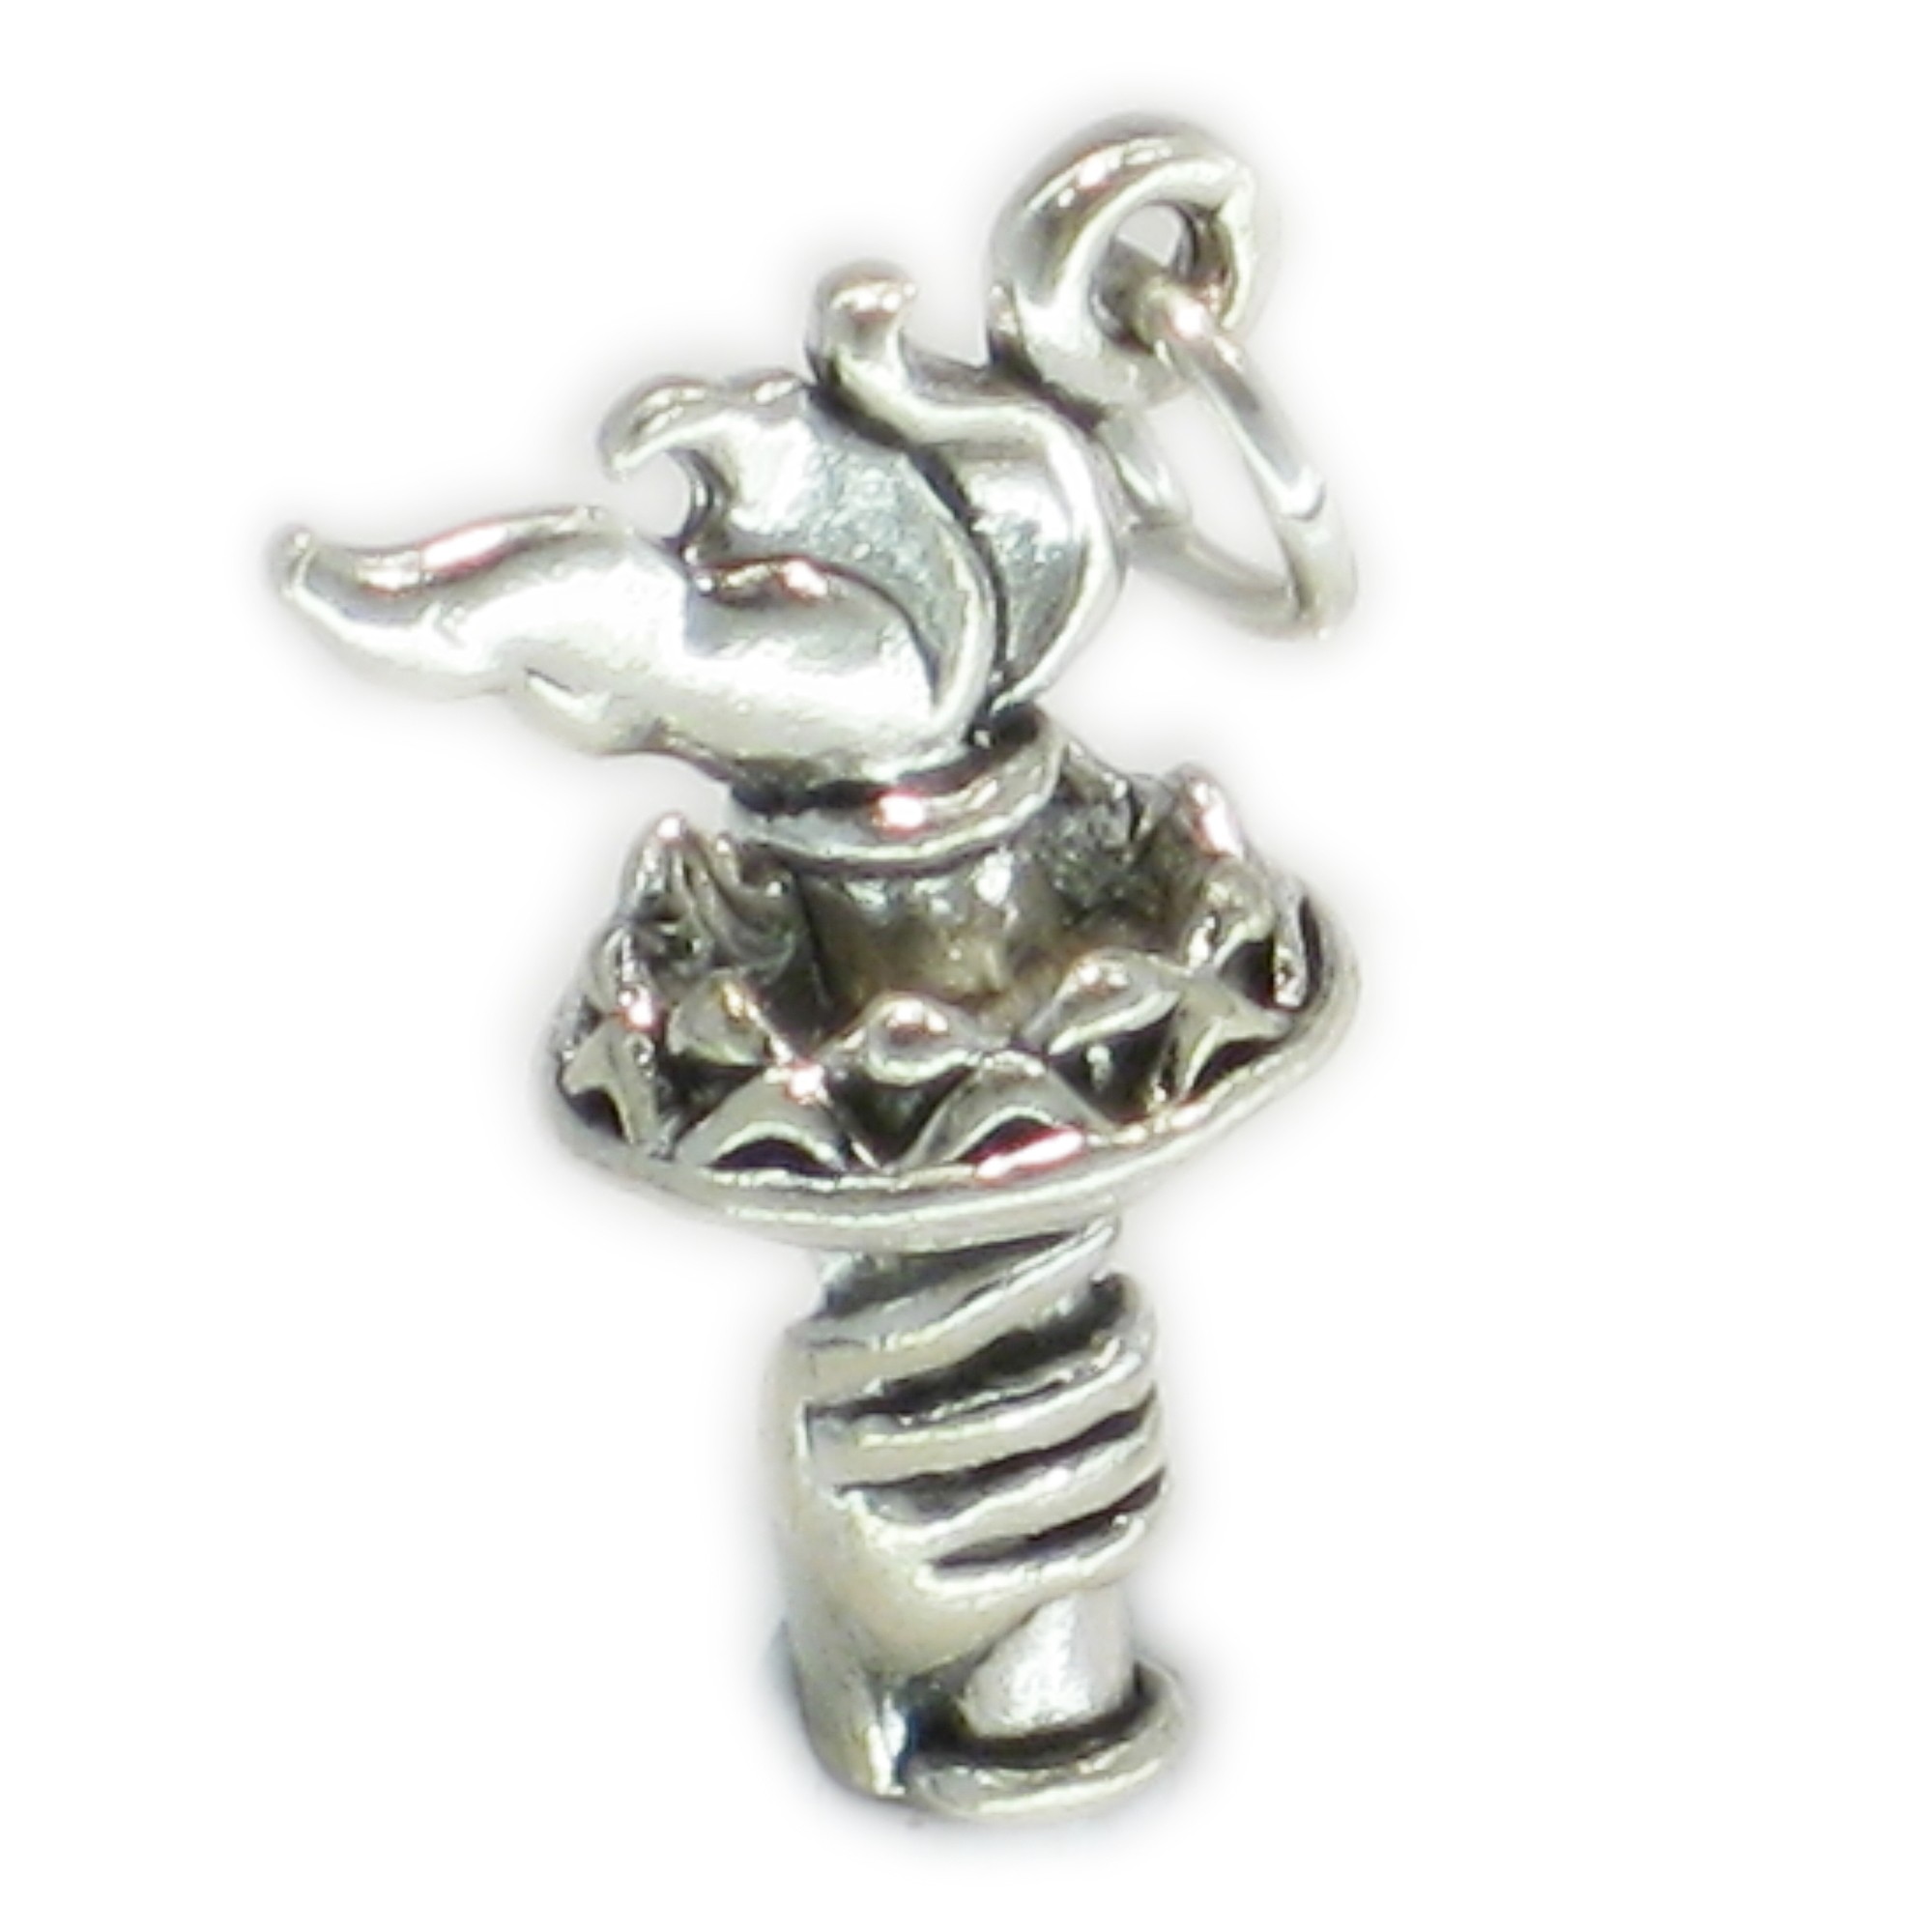 Olympic Torch sterling silver charm .925 x 1 Olympics Torches charms